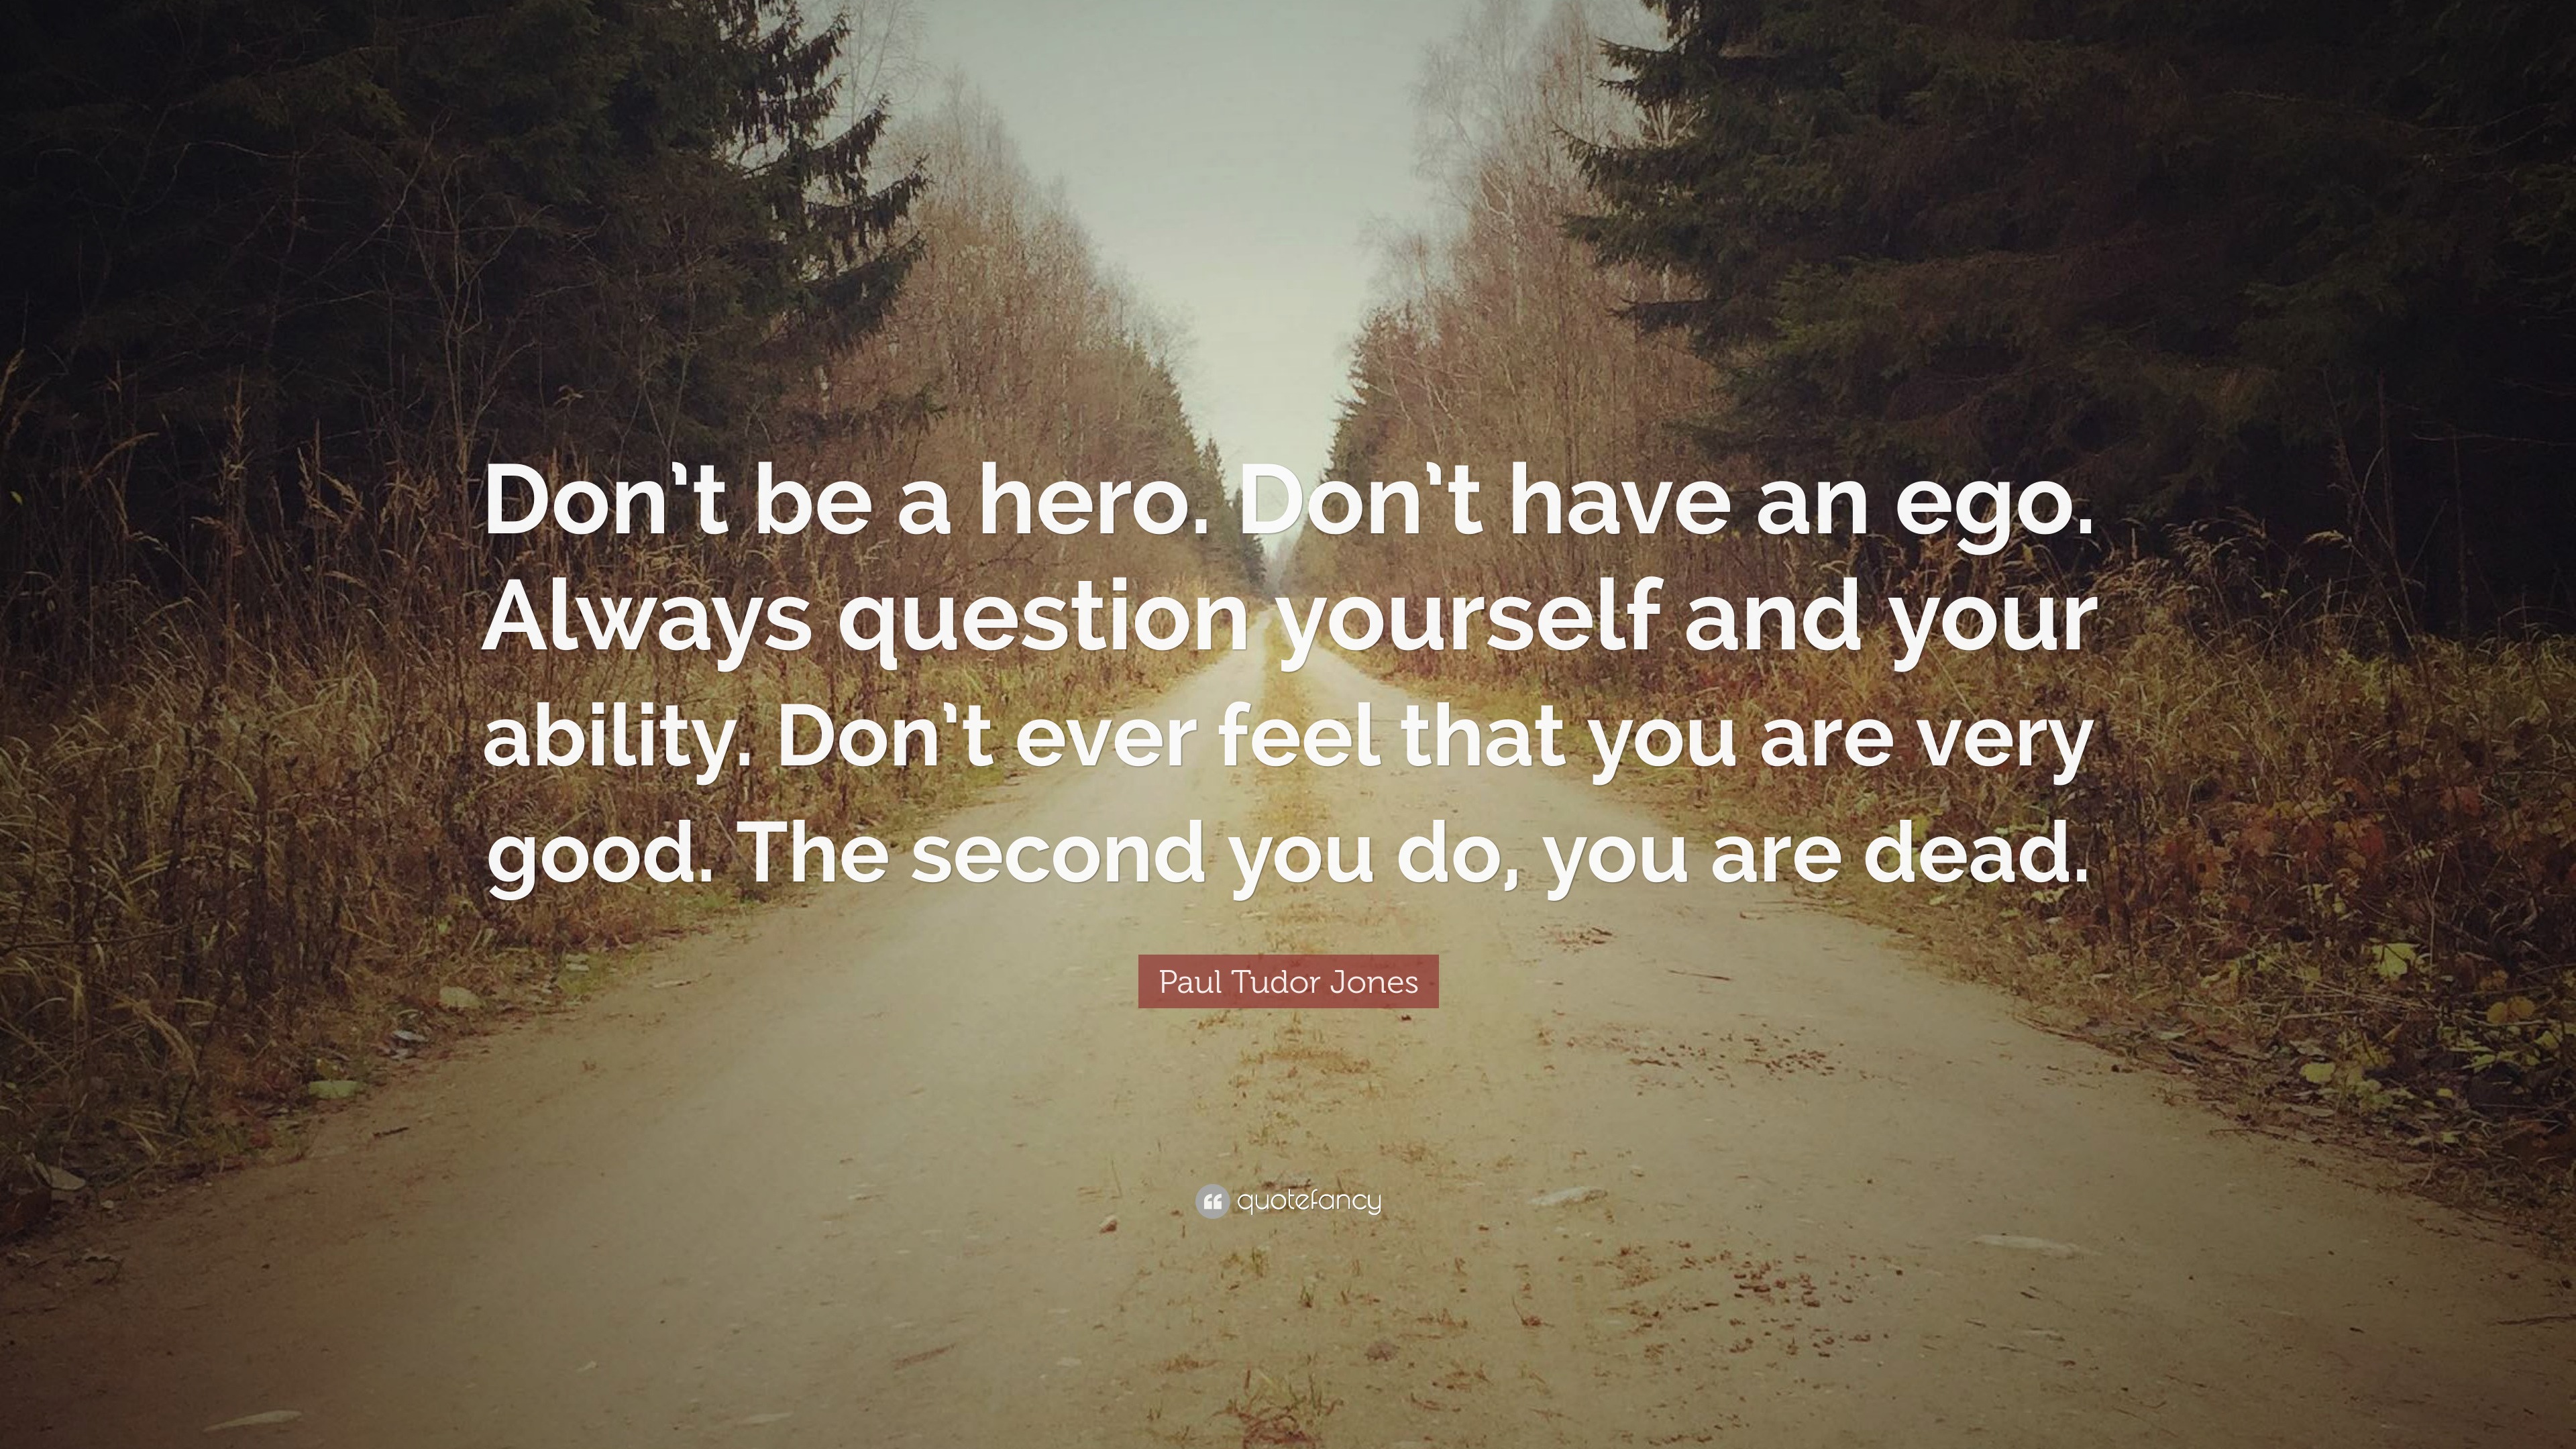 Paul Tudor Jones Quote: “Don’t be a hero. Don’t have an ego. Always ...